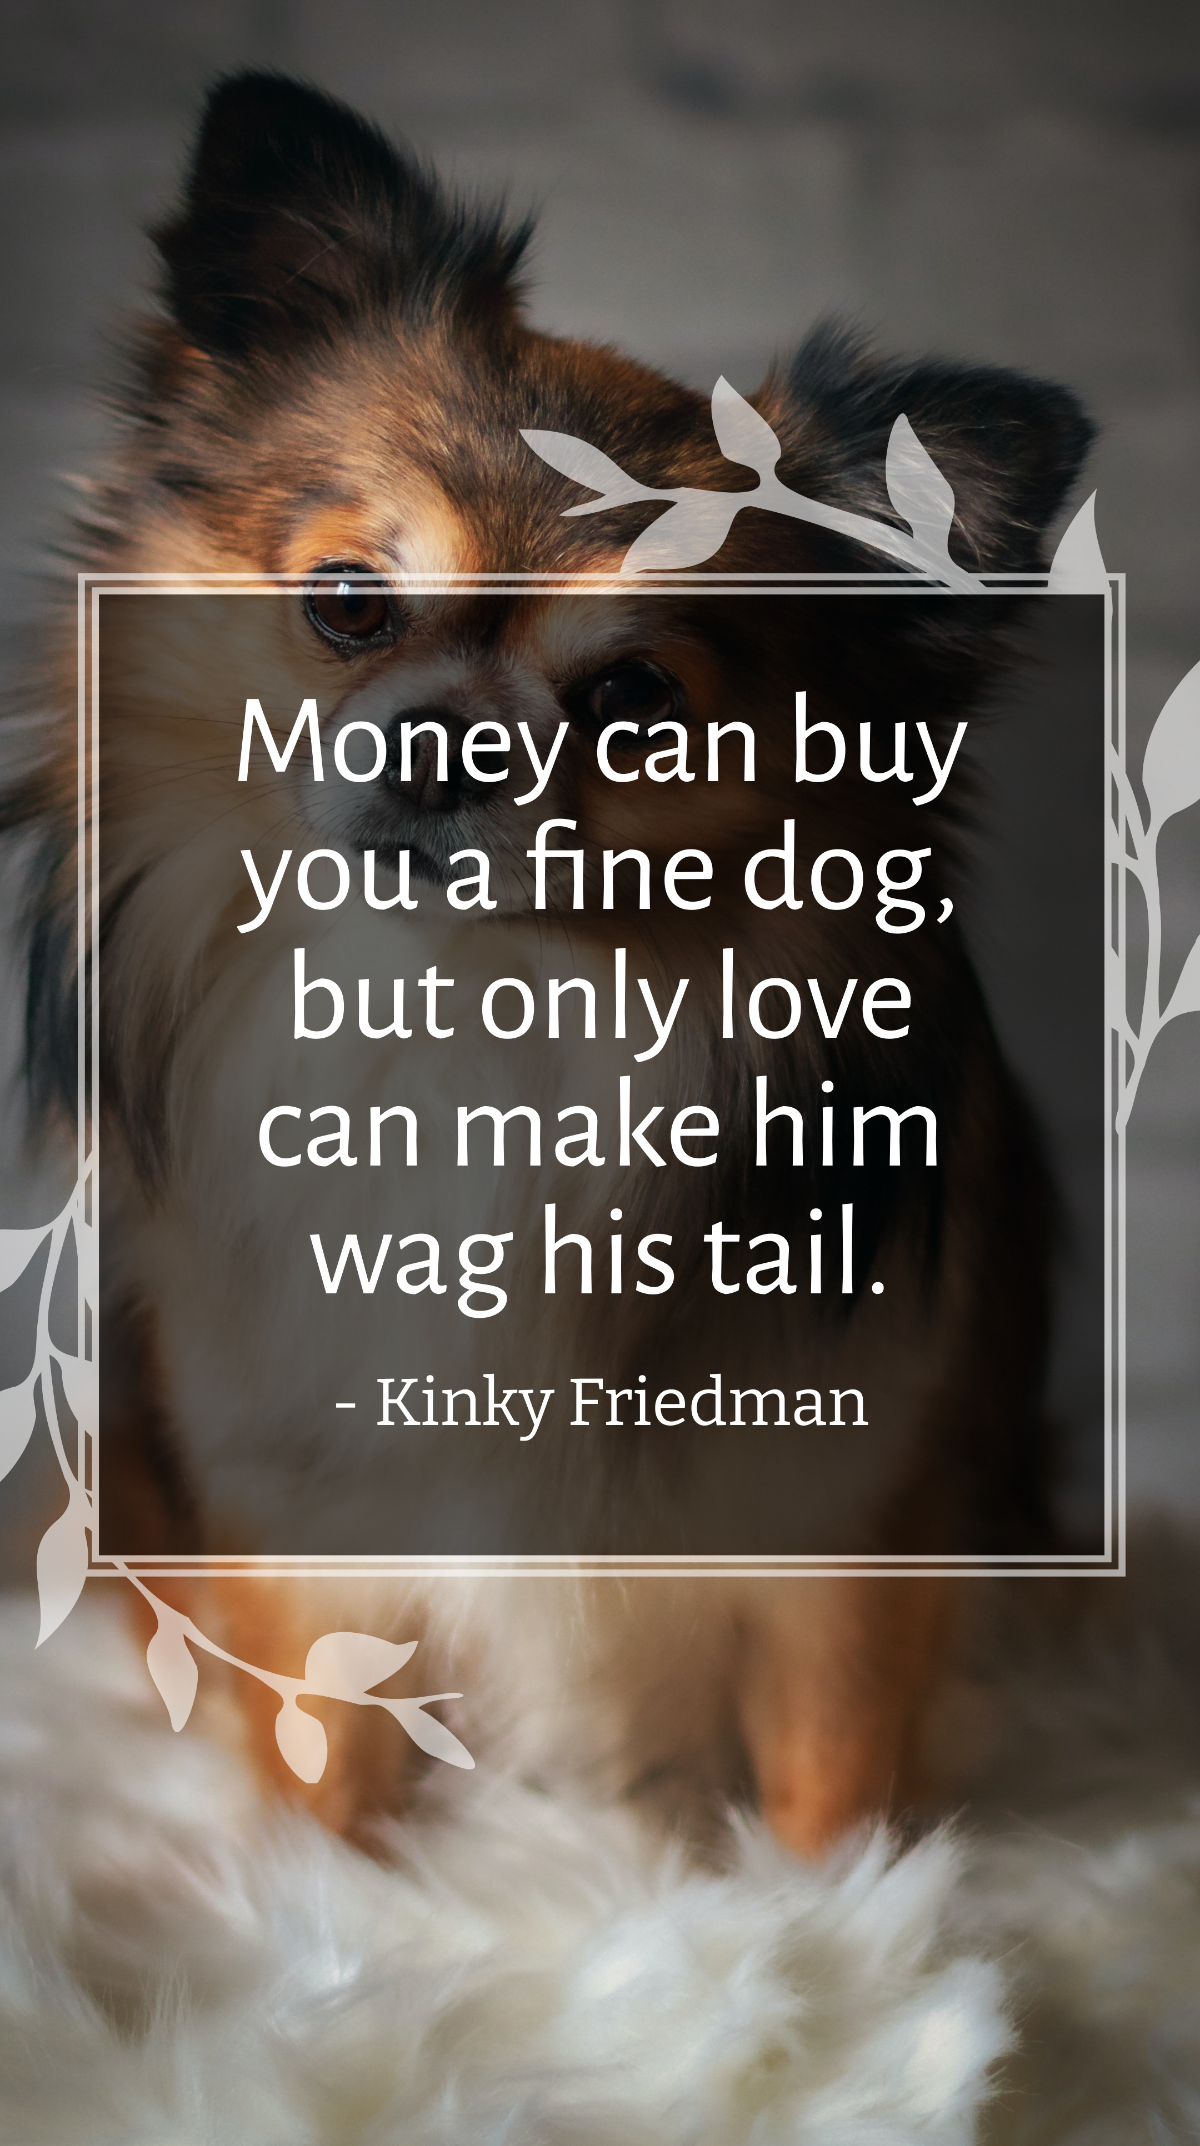 Free Kinky Friedman - Money can buy you a fine dog, but only love can make him wag his tail. Template